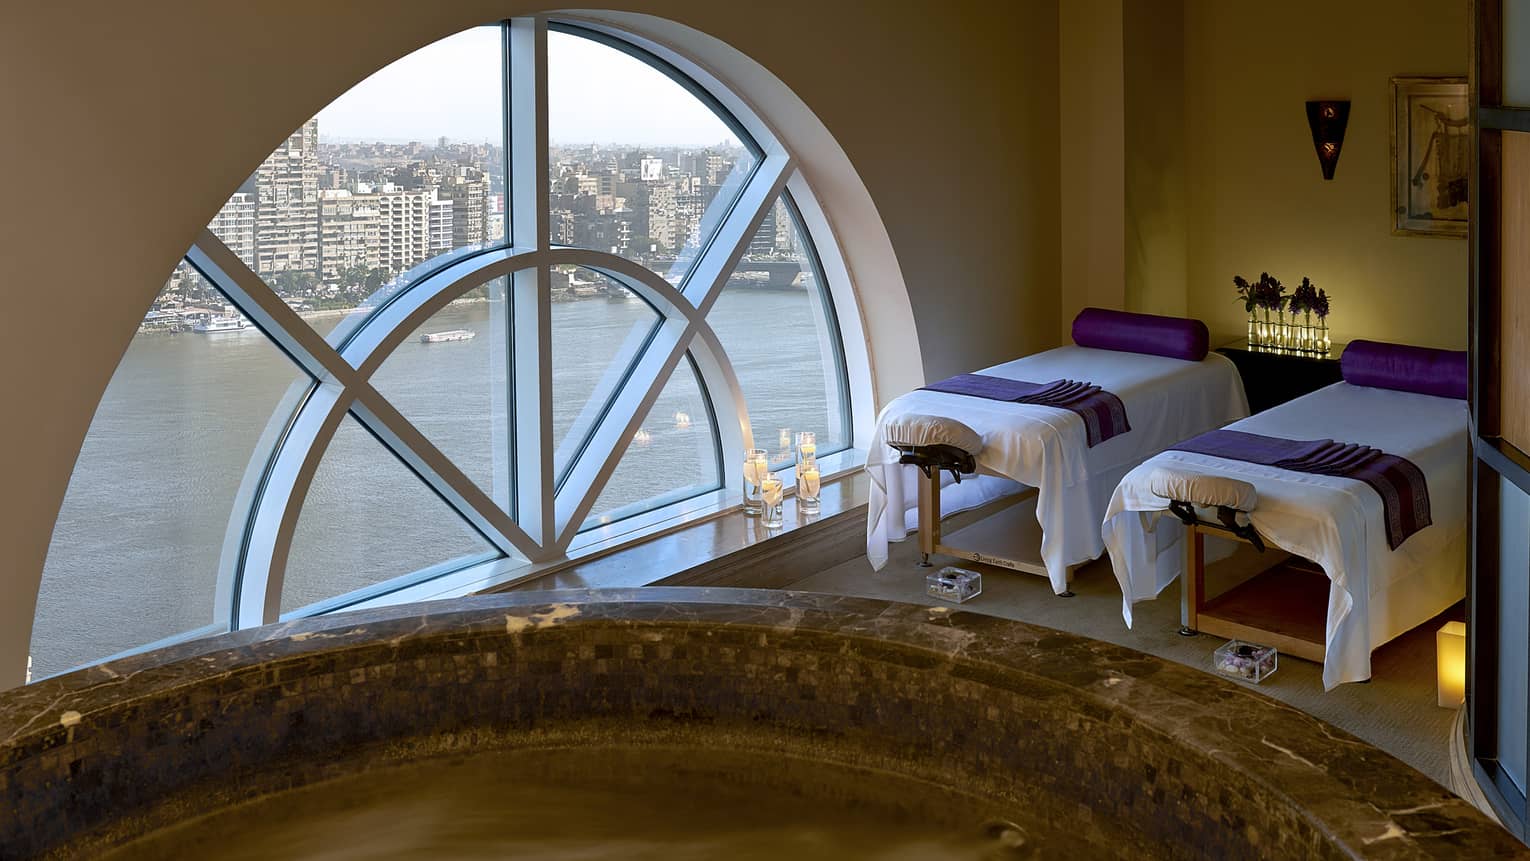 Two massage tables side-by-side in couples spa suite by lare crescent-shaped window overlooking Nile